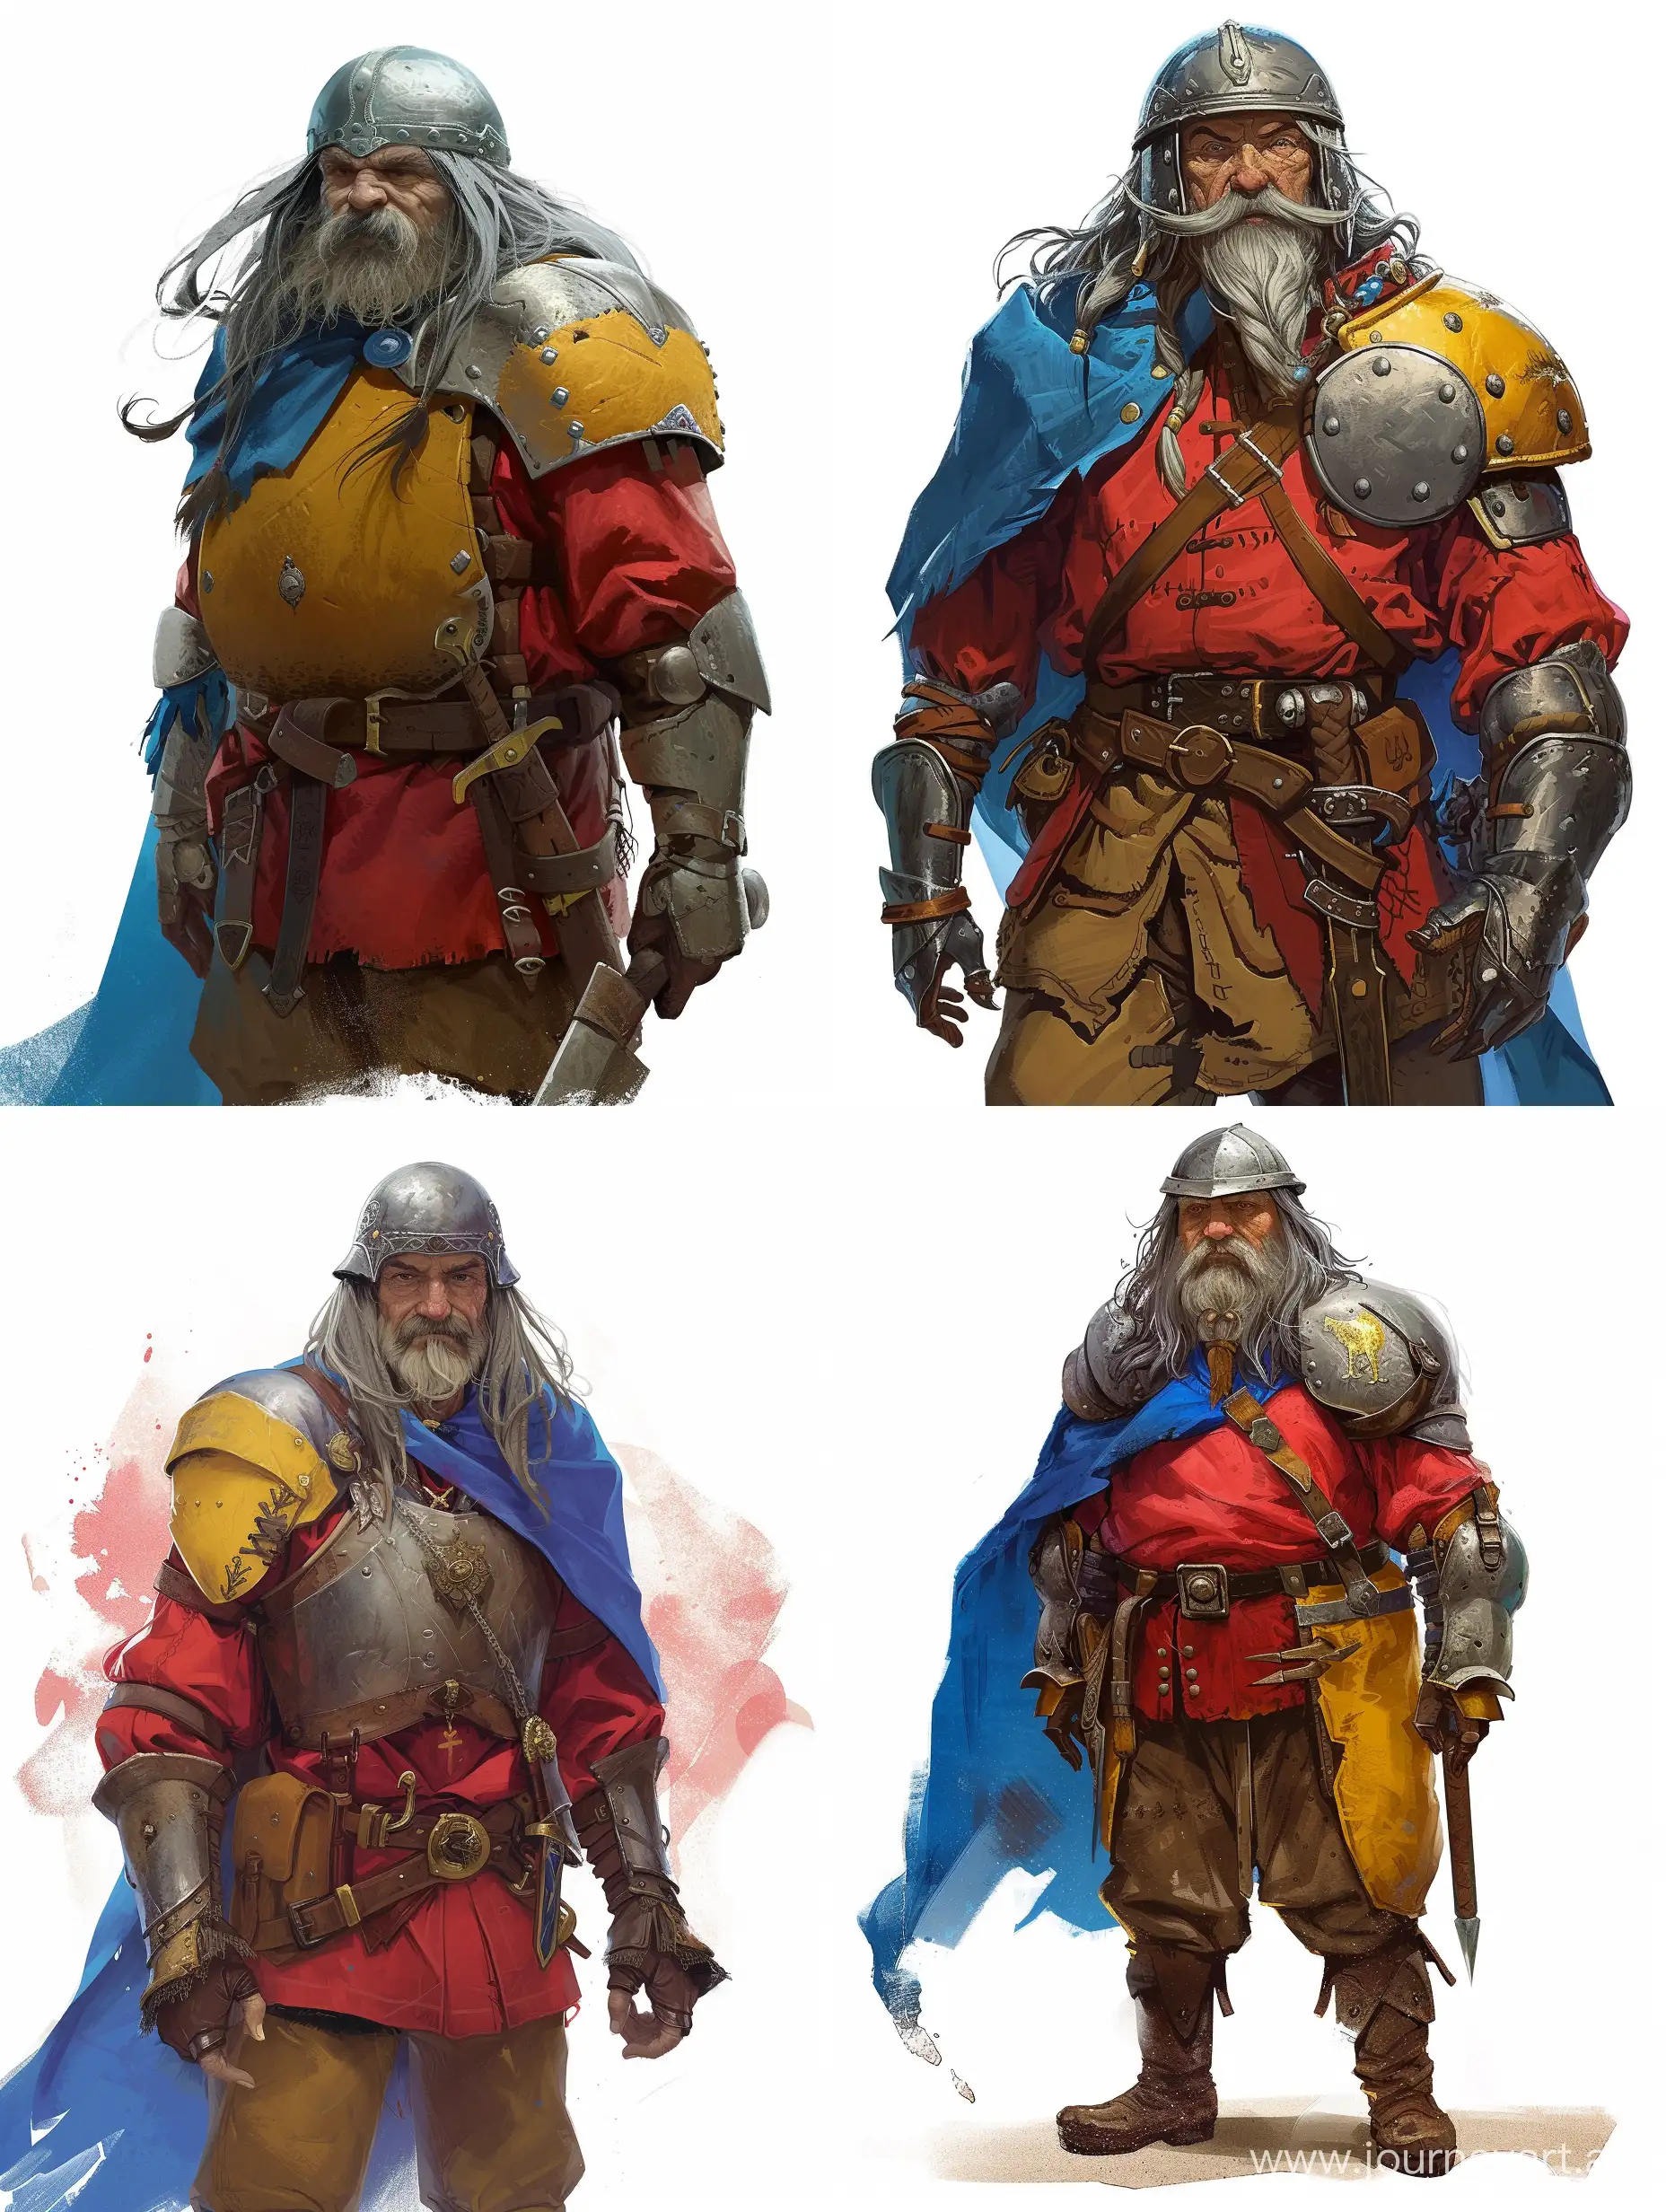 Elderly-Knight-in-Red-Shirt-and-Metal-Armor-with-Blue-Cloak